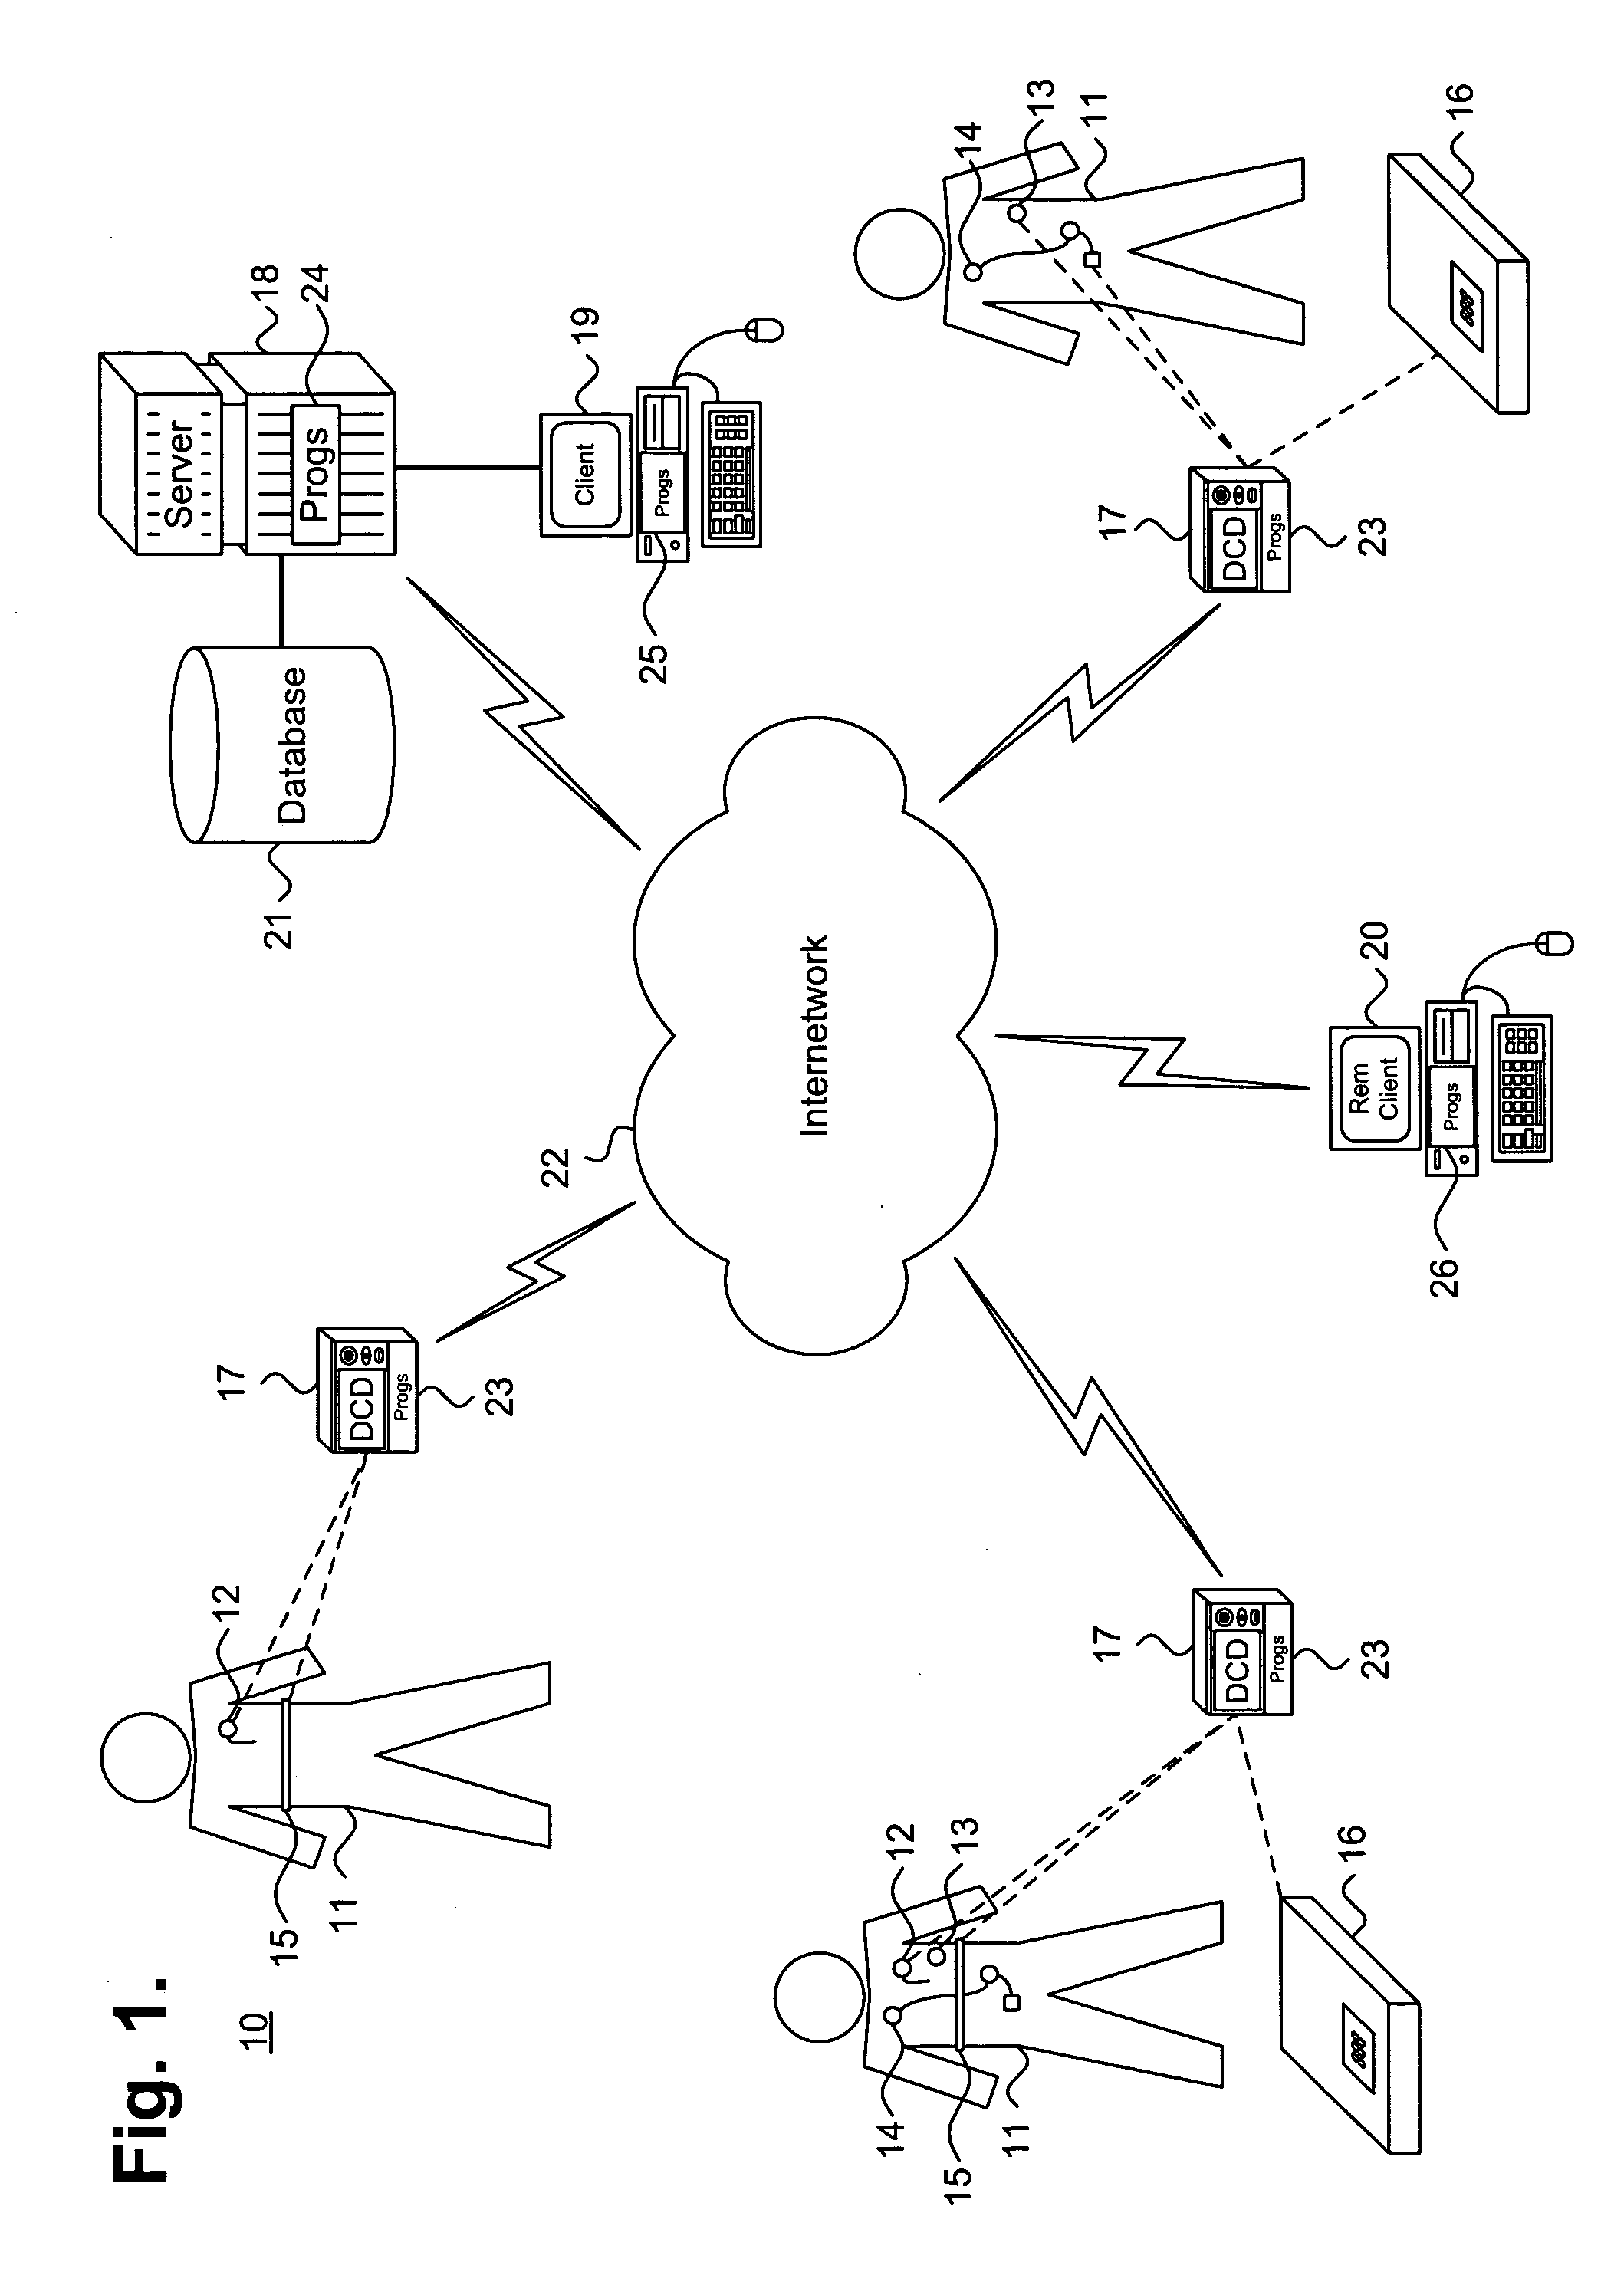 System and method for managing patient triage in an automated patient management system